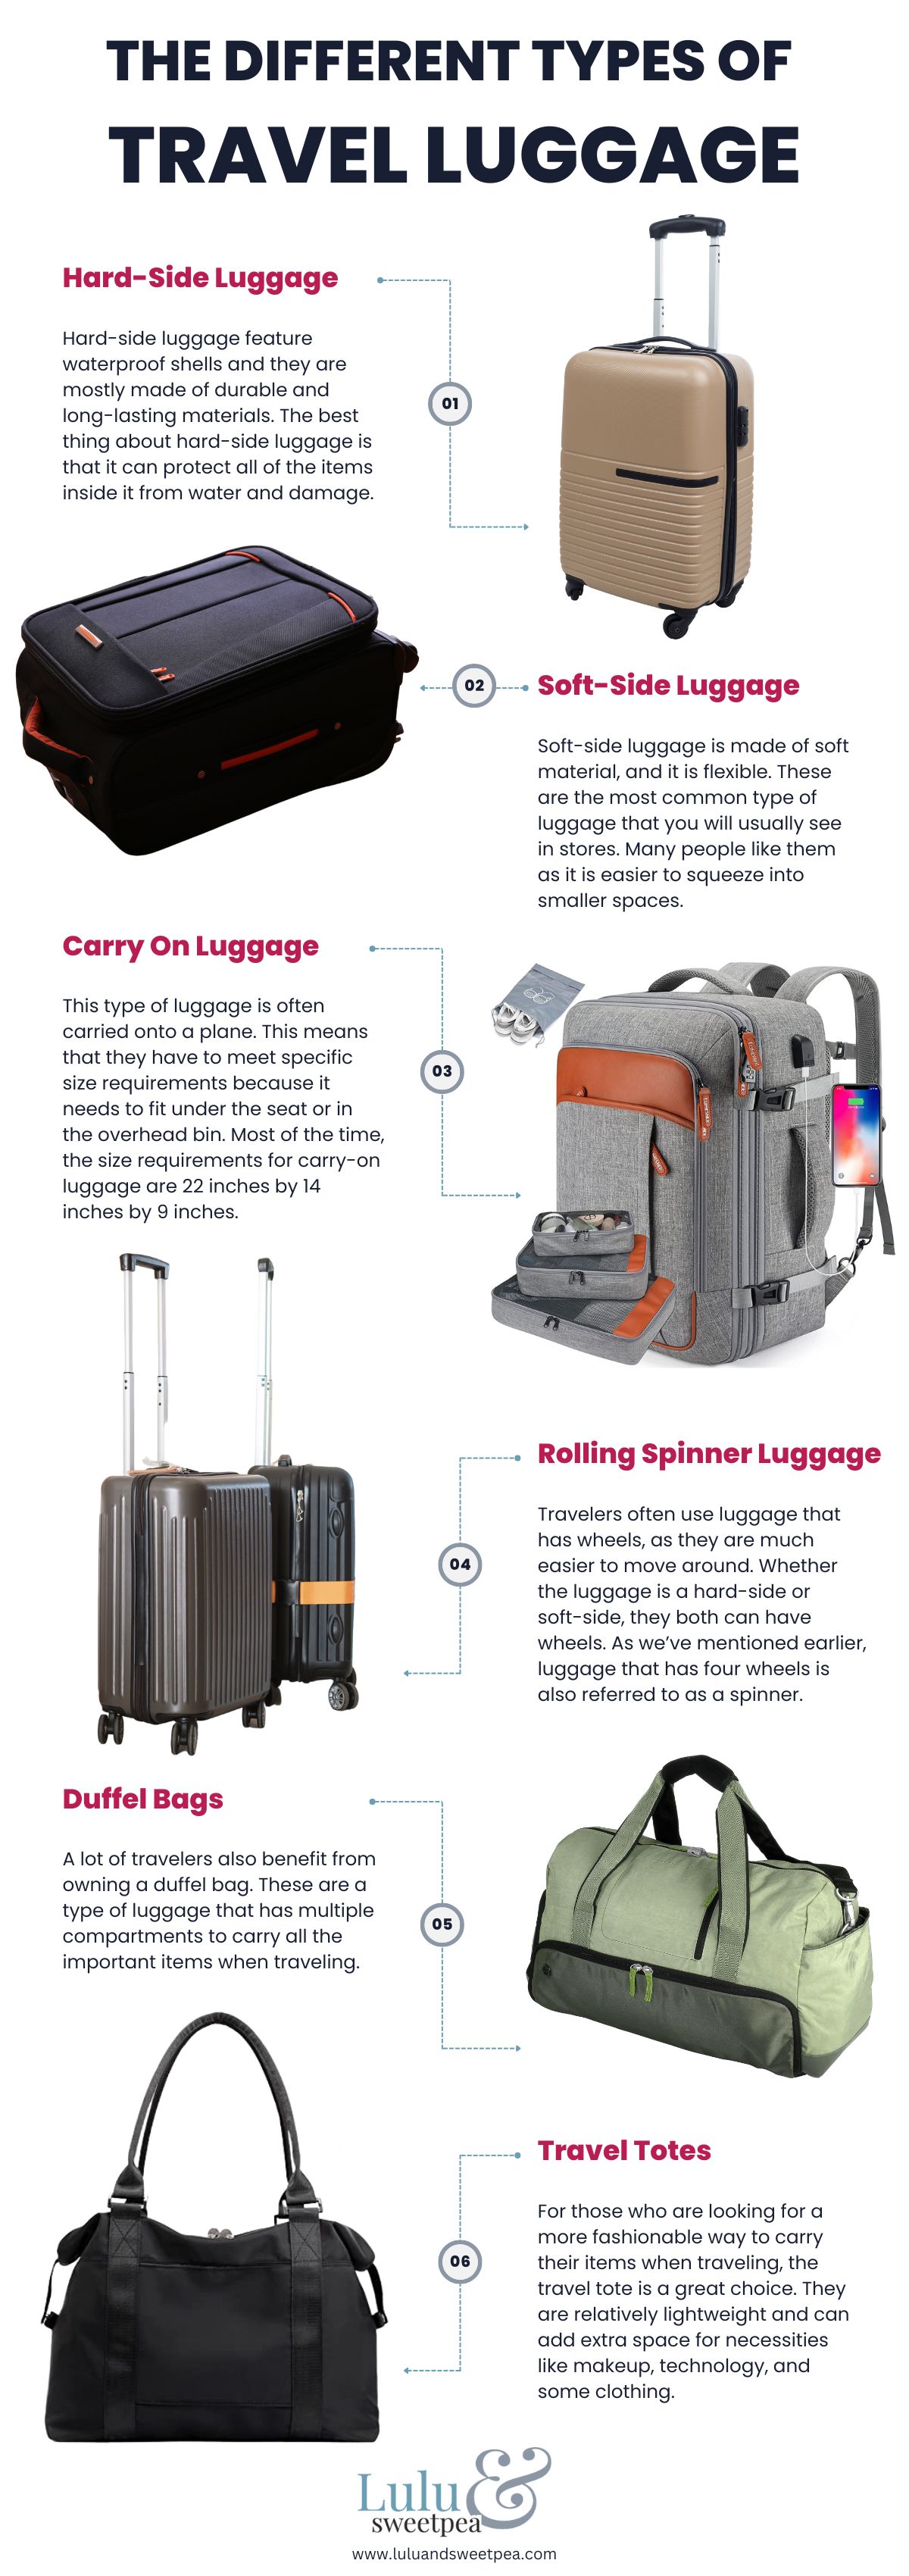 The Different Types of Travel Luggage